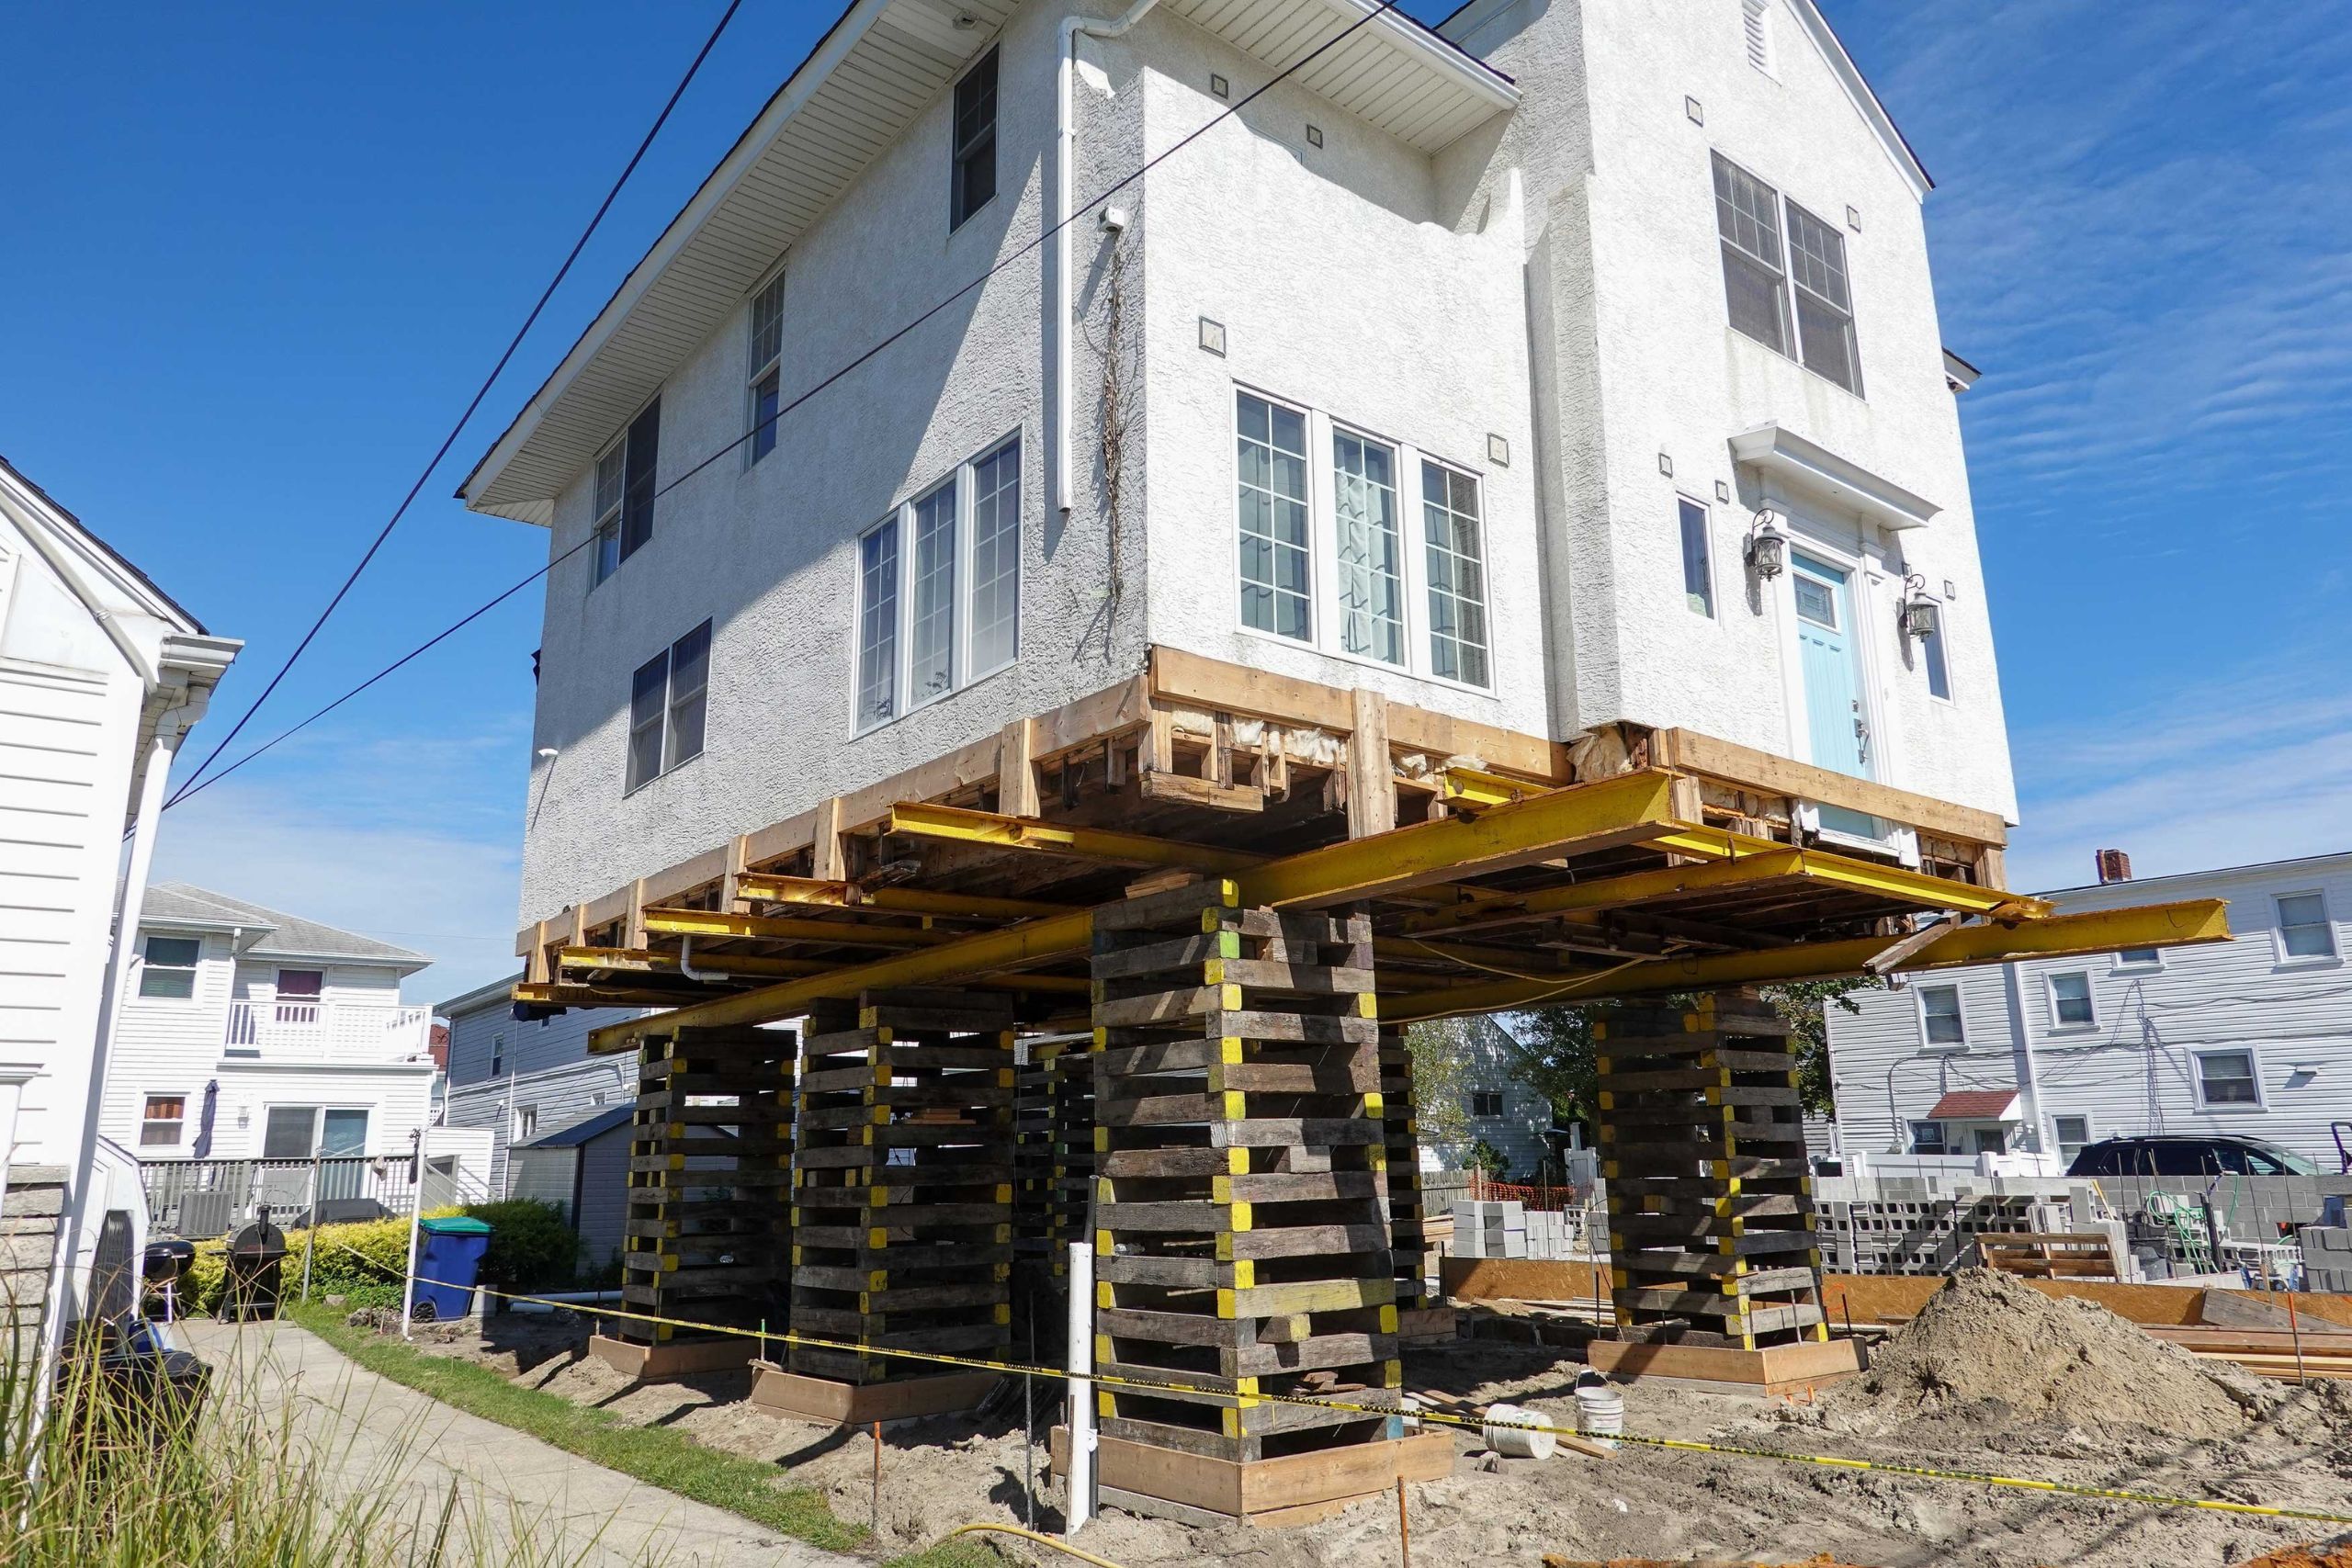 Located in West Chester, Pennsylvania, we are a company that specializes in house lifting, small distance house moving, piles and foundations.